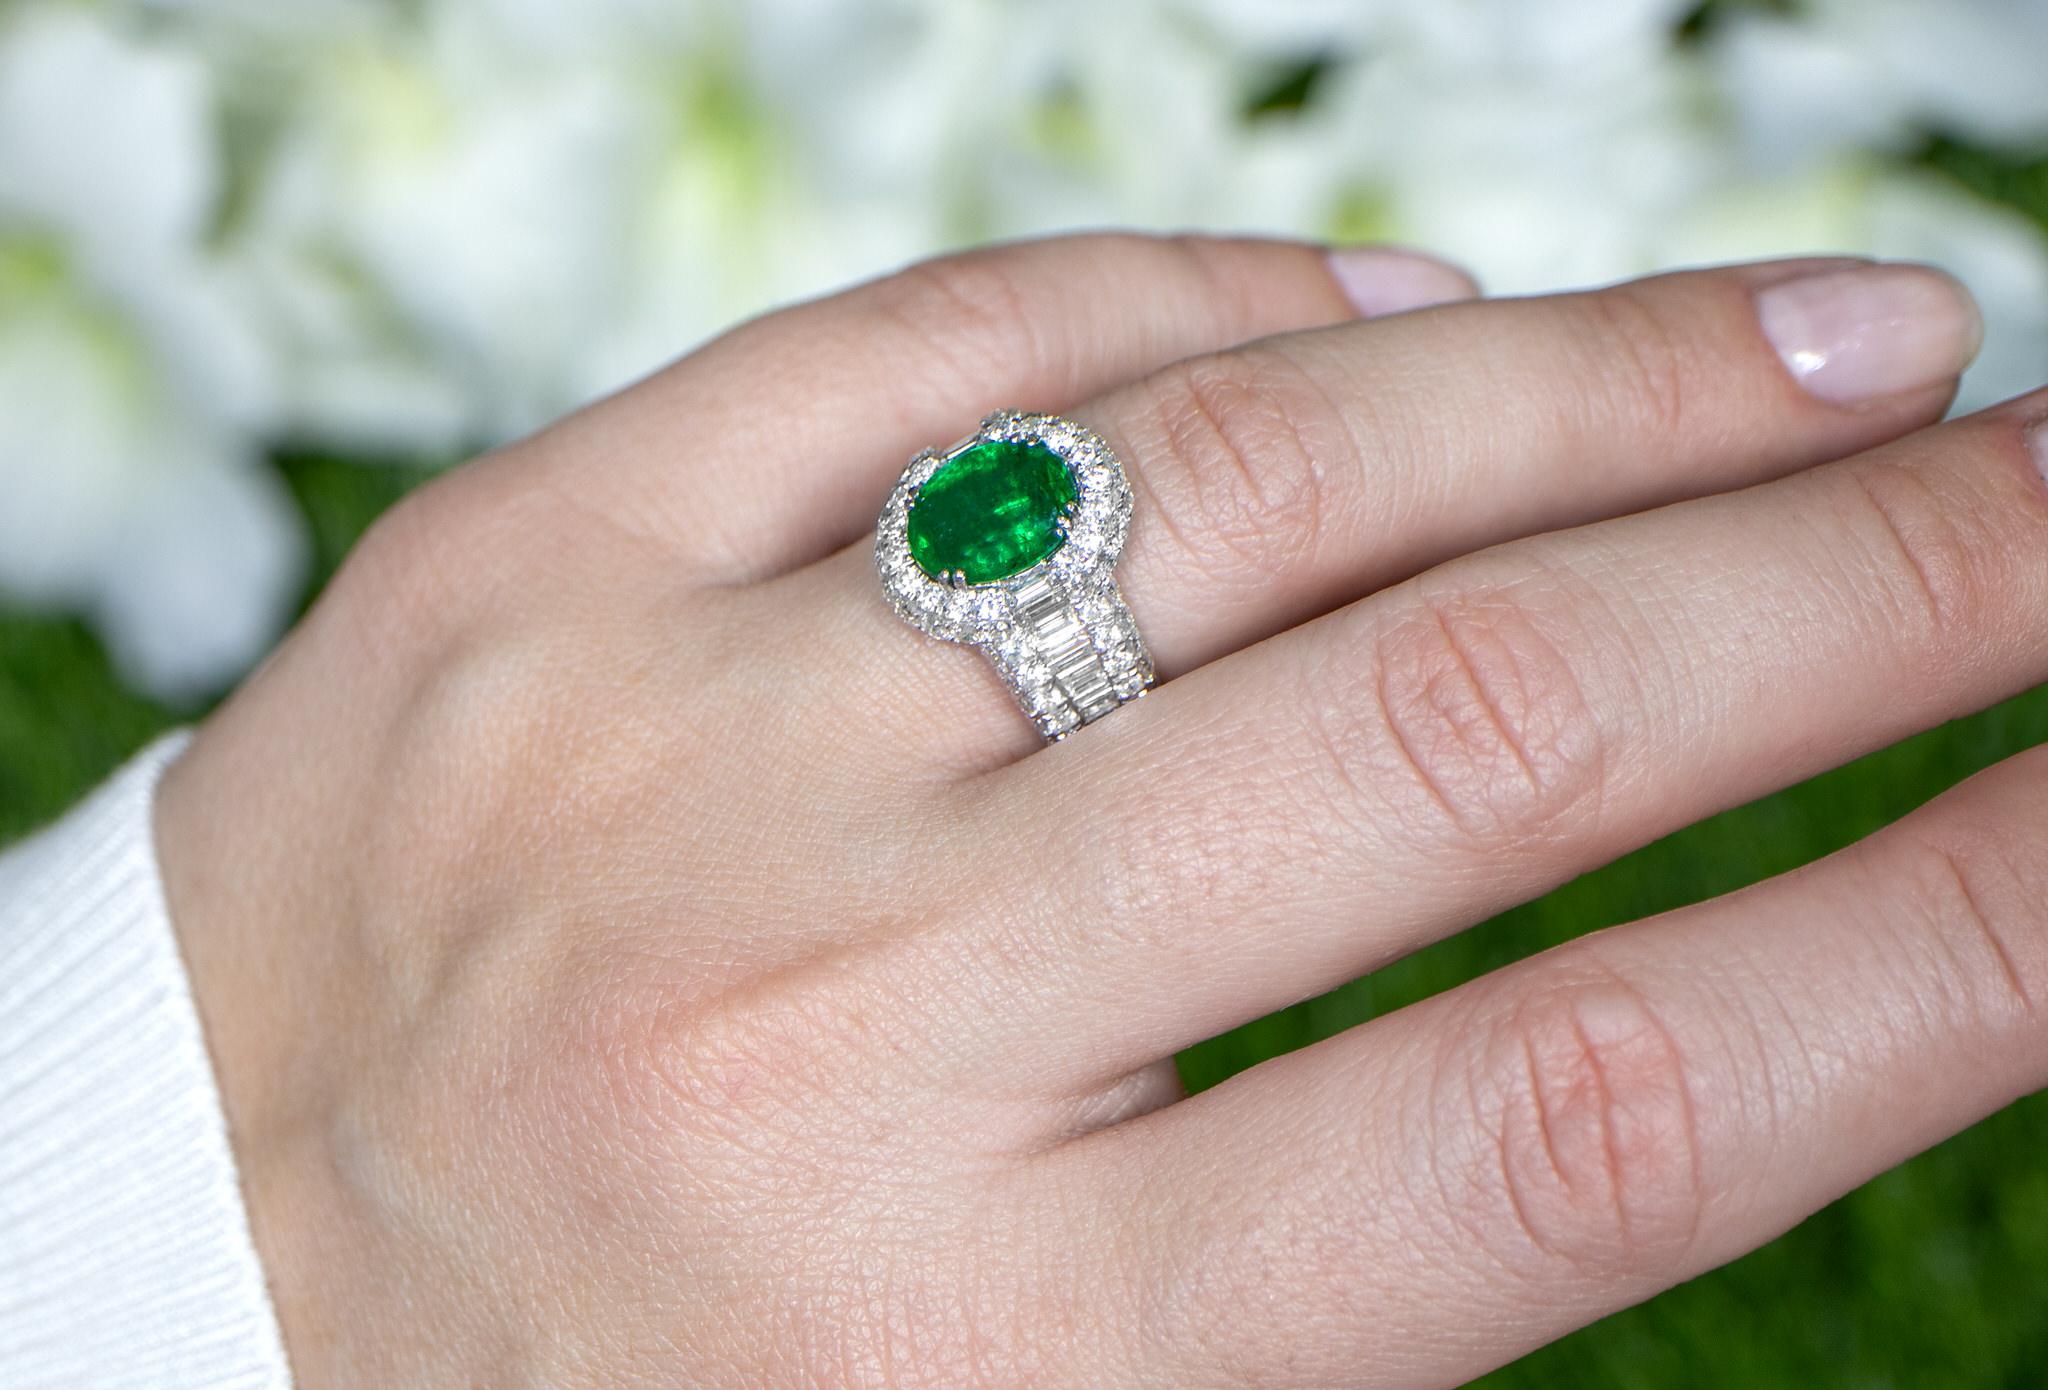 Oval Emerald Statement Ring With Diamond Setting 5.22 Carats 18K Gold In Excellent Condition For Sale In Laguna Niguel, CA